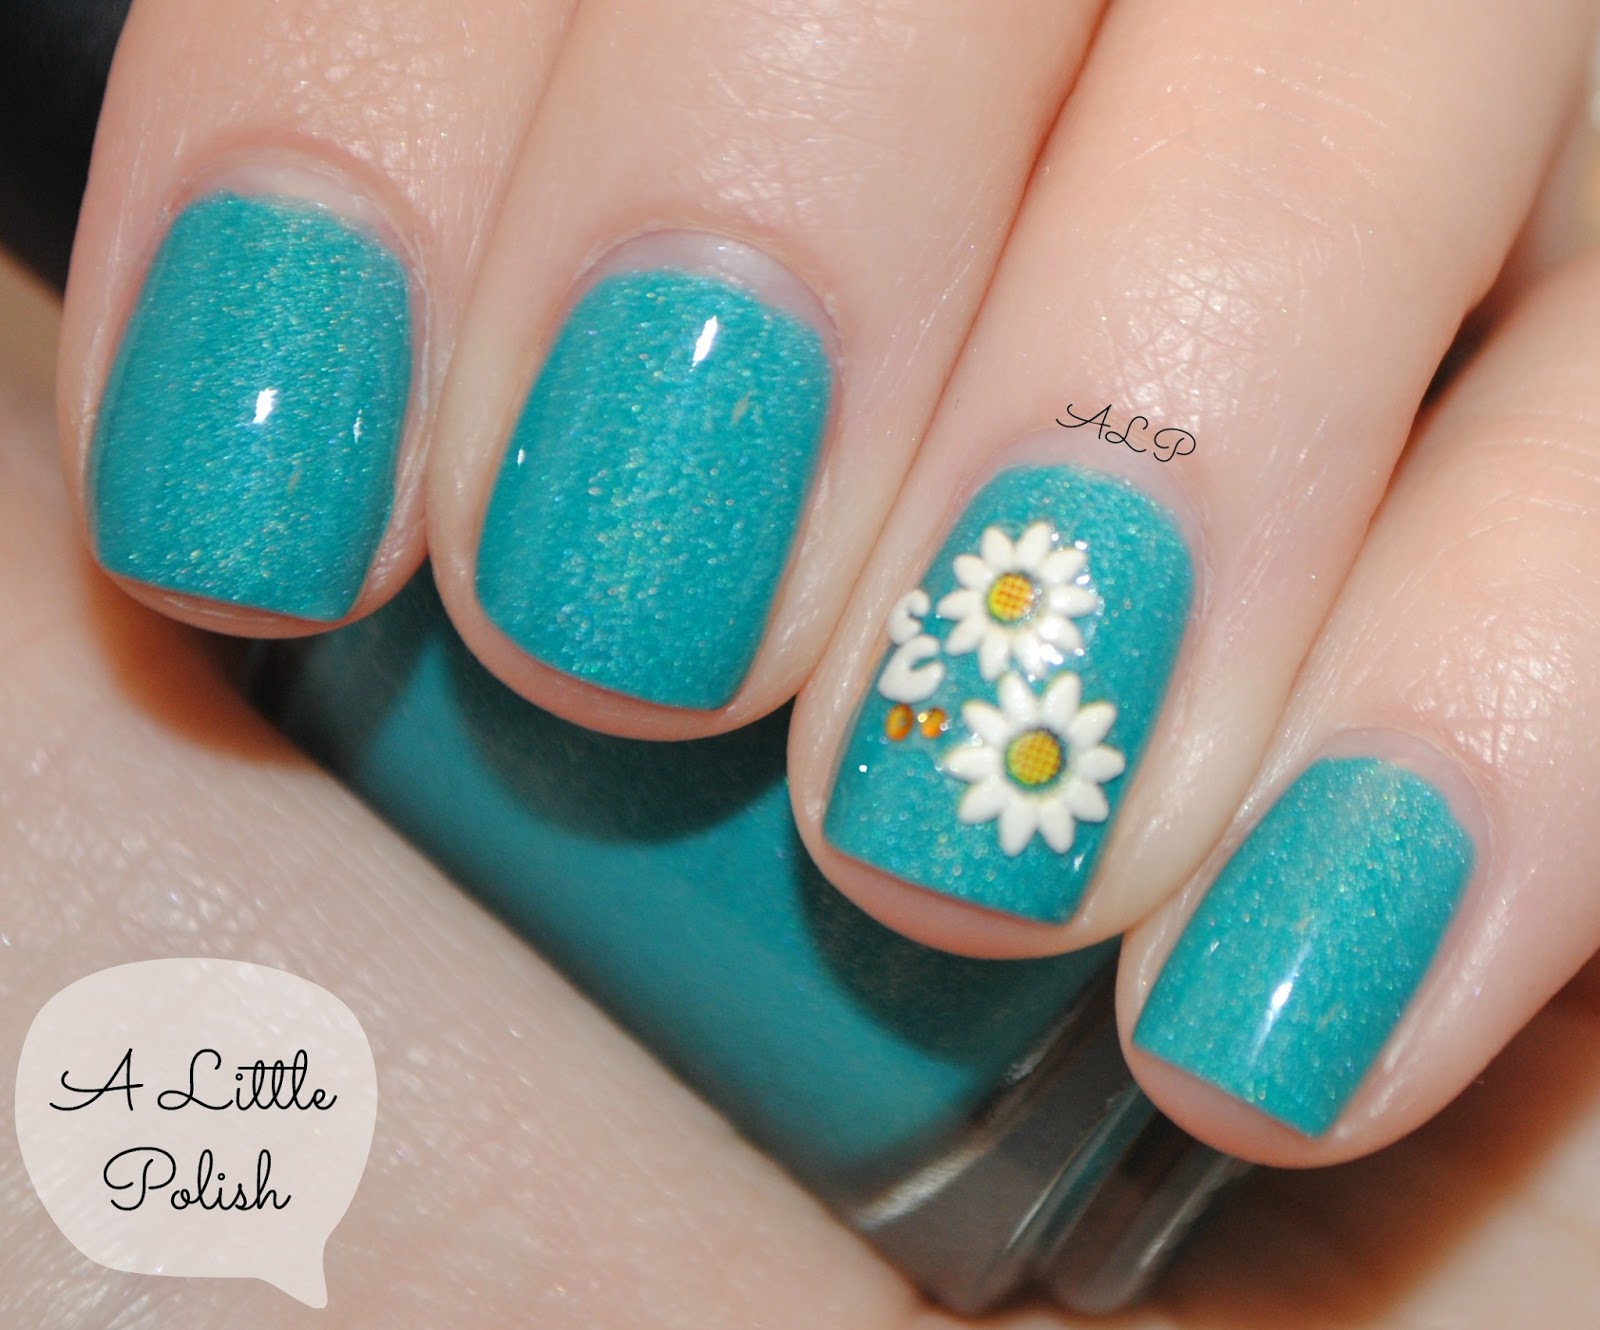 8. "You're Such a Pudapest: Nail Art Tips and Tricks" - wide 1